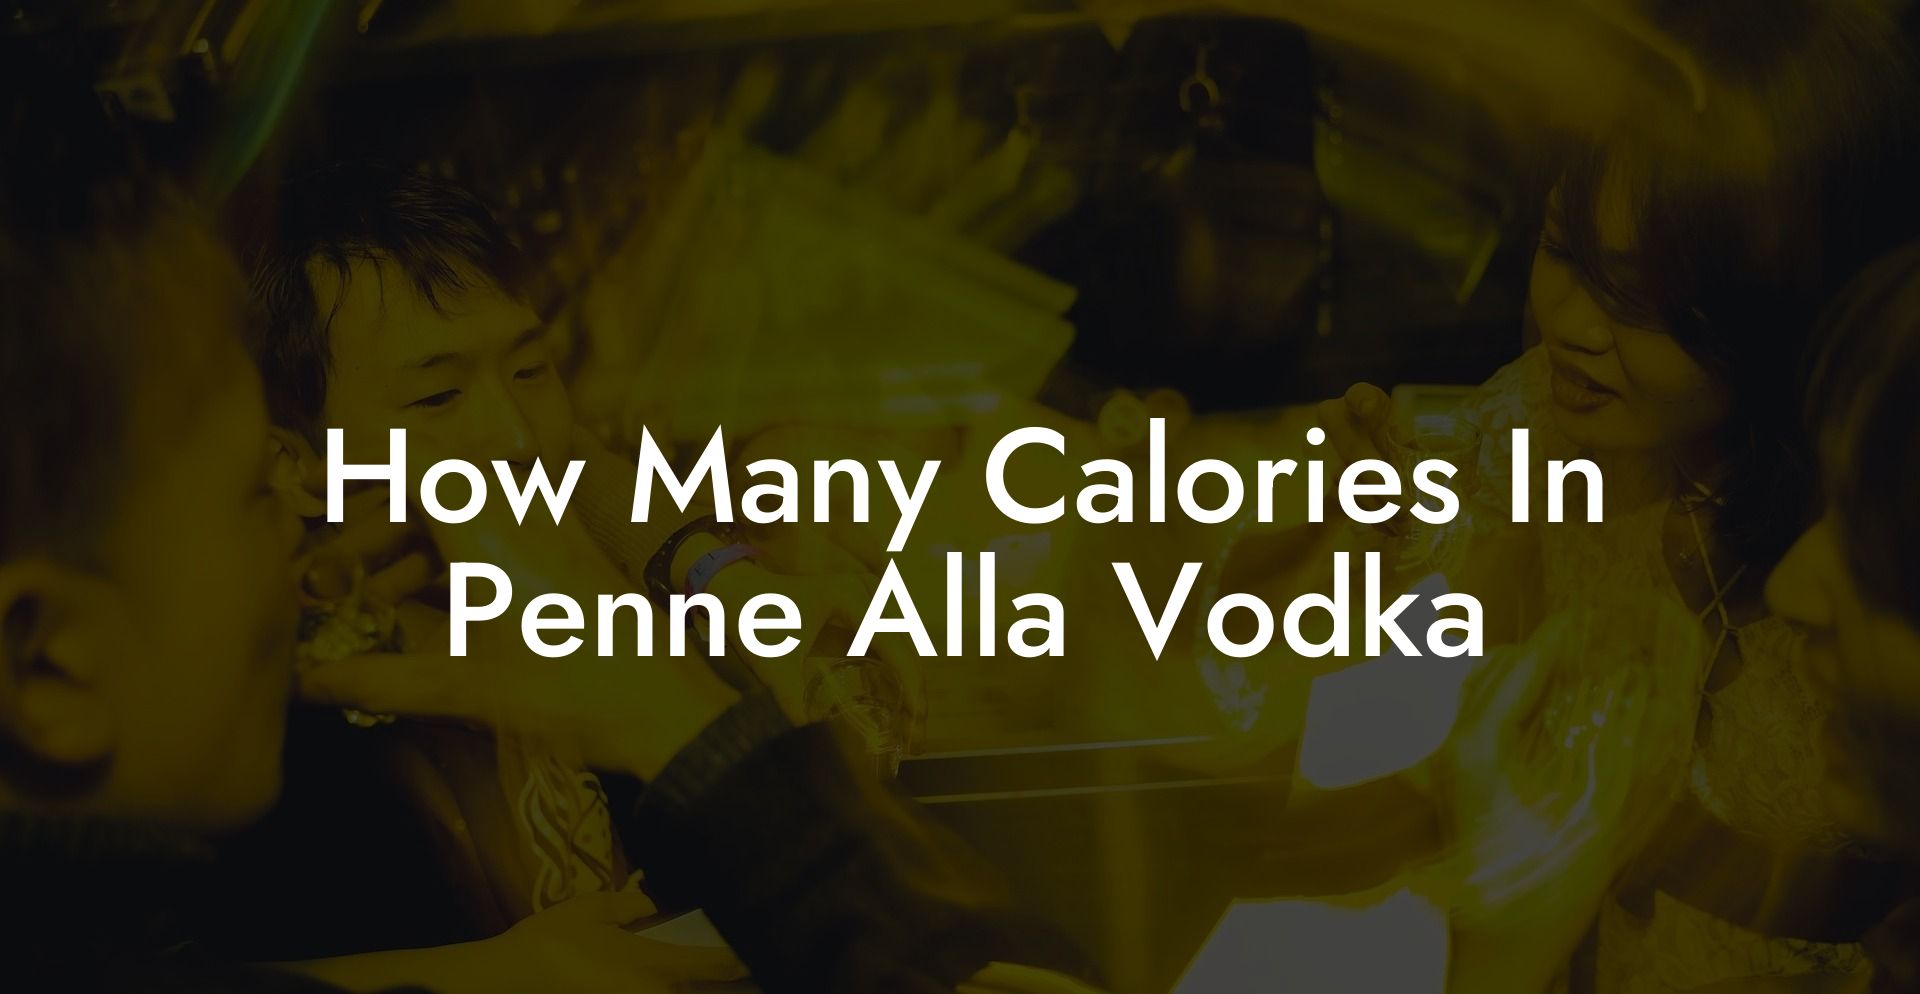 How Many Calories In Penne Alla Vodka